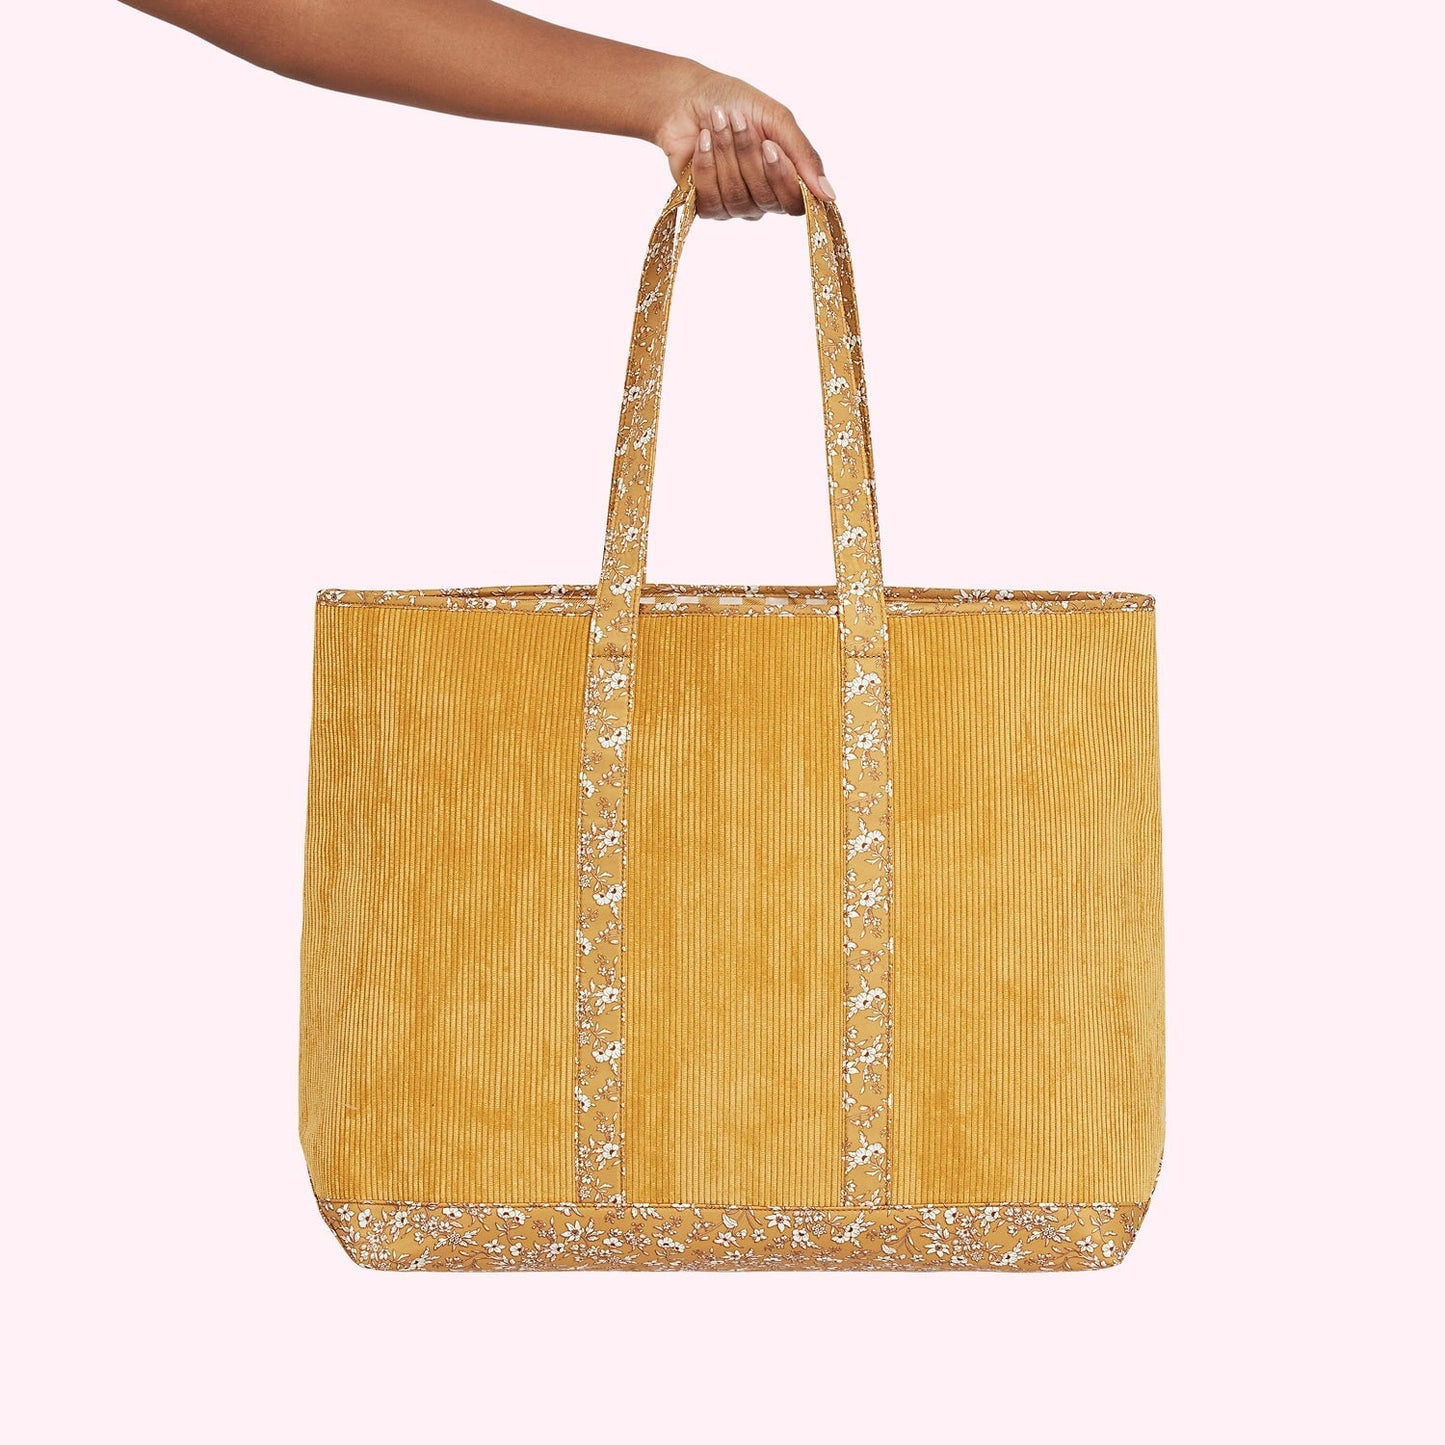 The Cozy Cottage Large Corduroy Tote